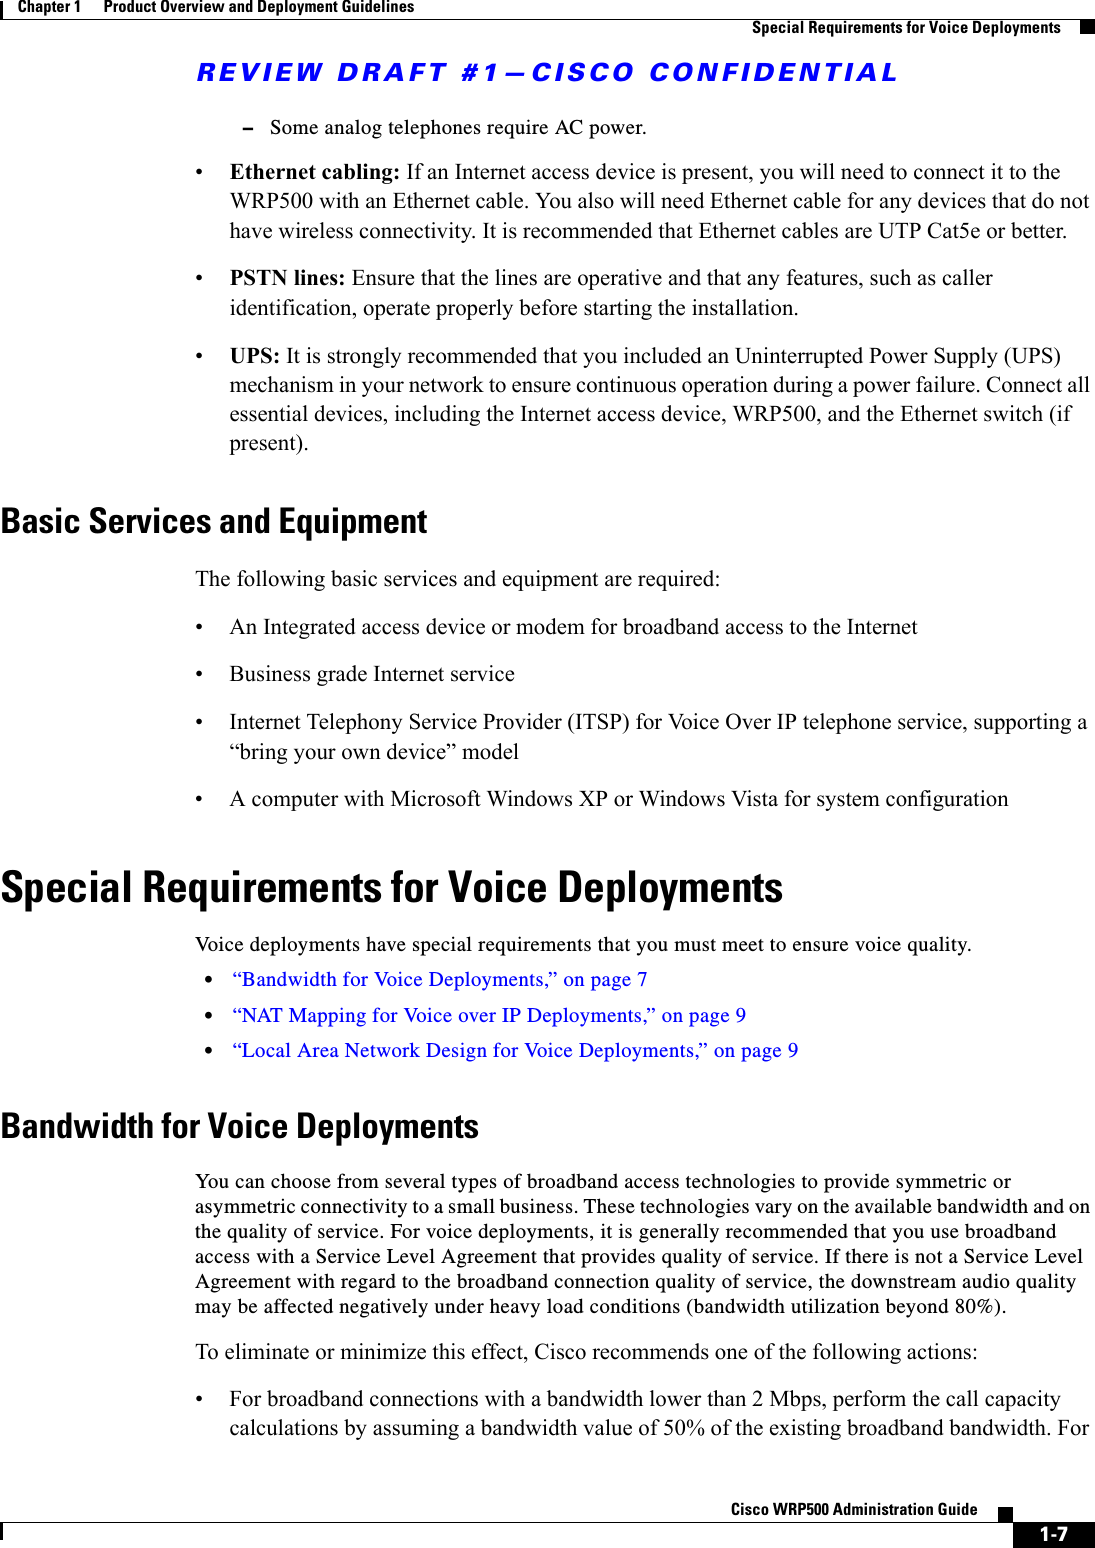 REVIEW DRAFT #1—CISCO CONFIDENTIAL1-7Cisco WRP500 Administration Guide Chapter 1      Product Overview and Deployment Guidelines  Special Requirements for Voice Deployments–Some analog telephones require AC power.•Ethernet cabling: If an Internet access device is present, you will need to connect it to the WRP500 with an Ethernet cable. You also will need Ethernet cable for any devices that do not have wireless connectivity. It is recommended that Ethernet cables are UTP Cat5e or better.•PSTN lines: Ensure that the lines are operative and that any features, such as caller identification, operate properly before starting the installation. •UPS: It is strongly recommended that you included an Uninterrupted Power Supply (UPS) mechanism in your network to ensure continuous operation during a power failure. Connect all essential devices, including the Internet access device, WRP500, and the Ethernet switch (if present).Basic Services and EquipmentThe following basic services and equipment are required:• An Integrated access device or modem for broadband access to the Internet• Business grade Internet service• Internet Telephony Service Provider (ITSP) for Voice Over IP telephone service, supporting a “bring your own device” model• A computer with Microsoft Windows XP or Windows Vista for system configurationSpecial Requirements for Voice DeploymentsVoice deployments have special requirements that you must meet to ensure voice quality.•“Bandwidth for Voice Deployments,” on page 7•“NAT Mapping for Voice over IP Deployments,” on page 9•“Local Area Network Design for Voice Deployments,” on page 9Bandwidth for Voice DeploymentsYou can choose from several types of broadband access technologies to provide symmetric or asymmetric connectivity to a small business. These technologies vary on the available bandwidth and on the quality of service. For voice deployments, it is generally recommended that you use broadband access with a Service Level Agreement that provides quality of service. If there is not a Service Level Agreement with regard to the broadband connection quality of service, the downstream audio quality may be affected negatively under heavy load conditions (bandwidth utilization beyond 80%). To eliminate or minimize this effect, Cisco recommends one of the following actions:• For broadband connections with a bandwidth lower than 2 Mbps, perform the call capacity calculations by assuming a bandwidth value of 50% of the existing broadband bandwidth. For 